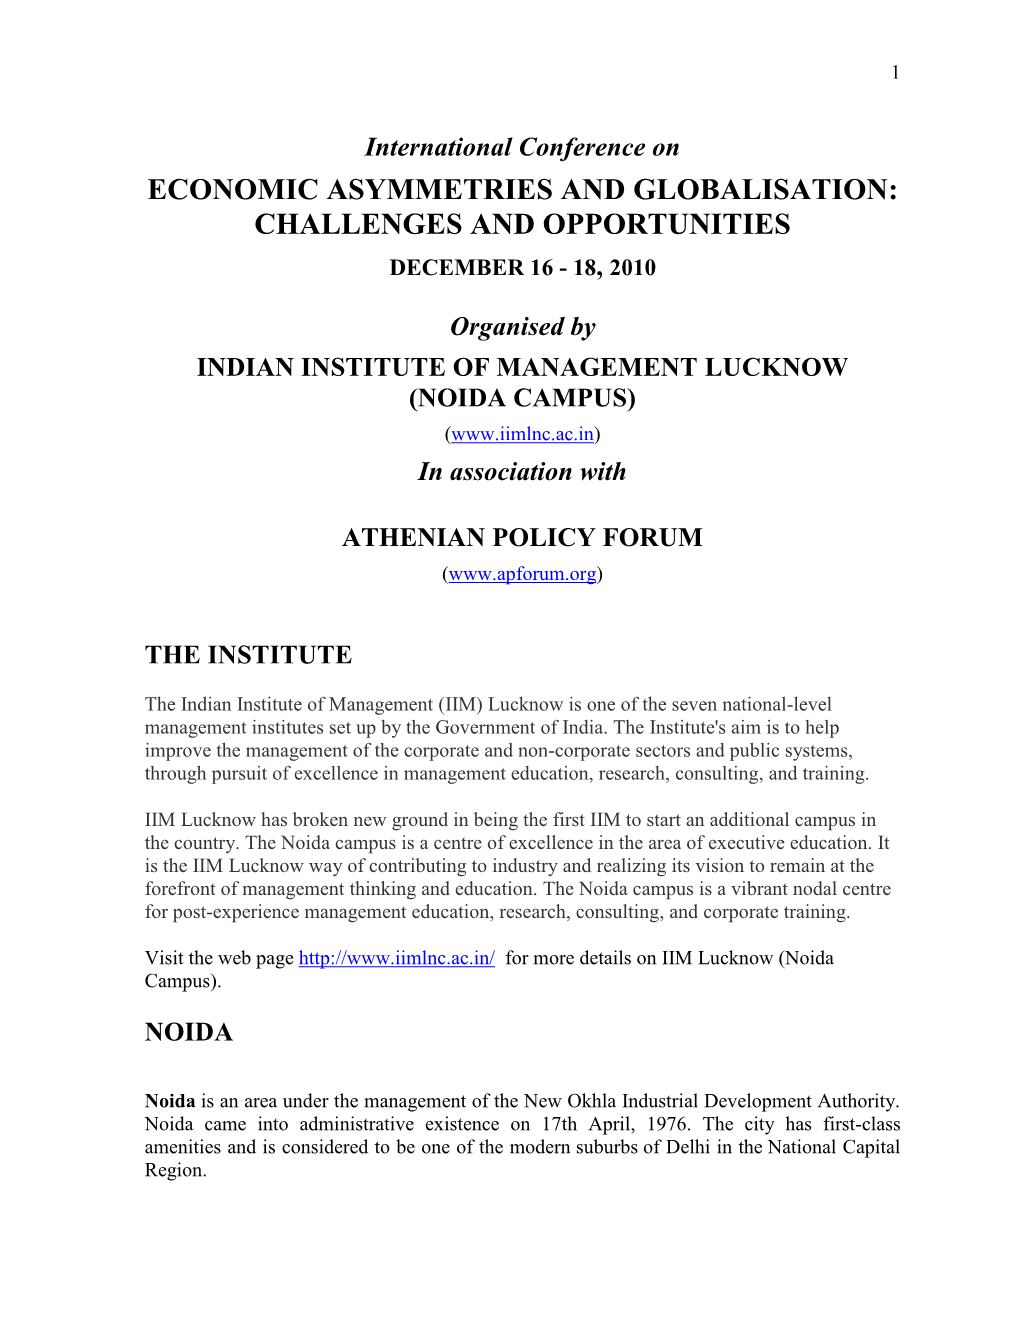 International Conference on Globalisation and Economic